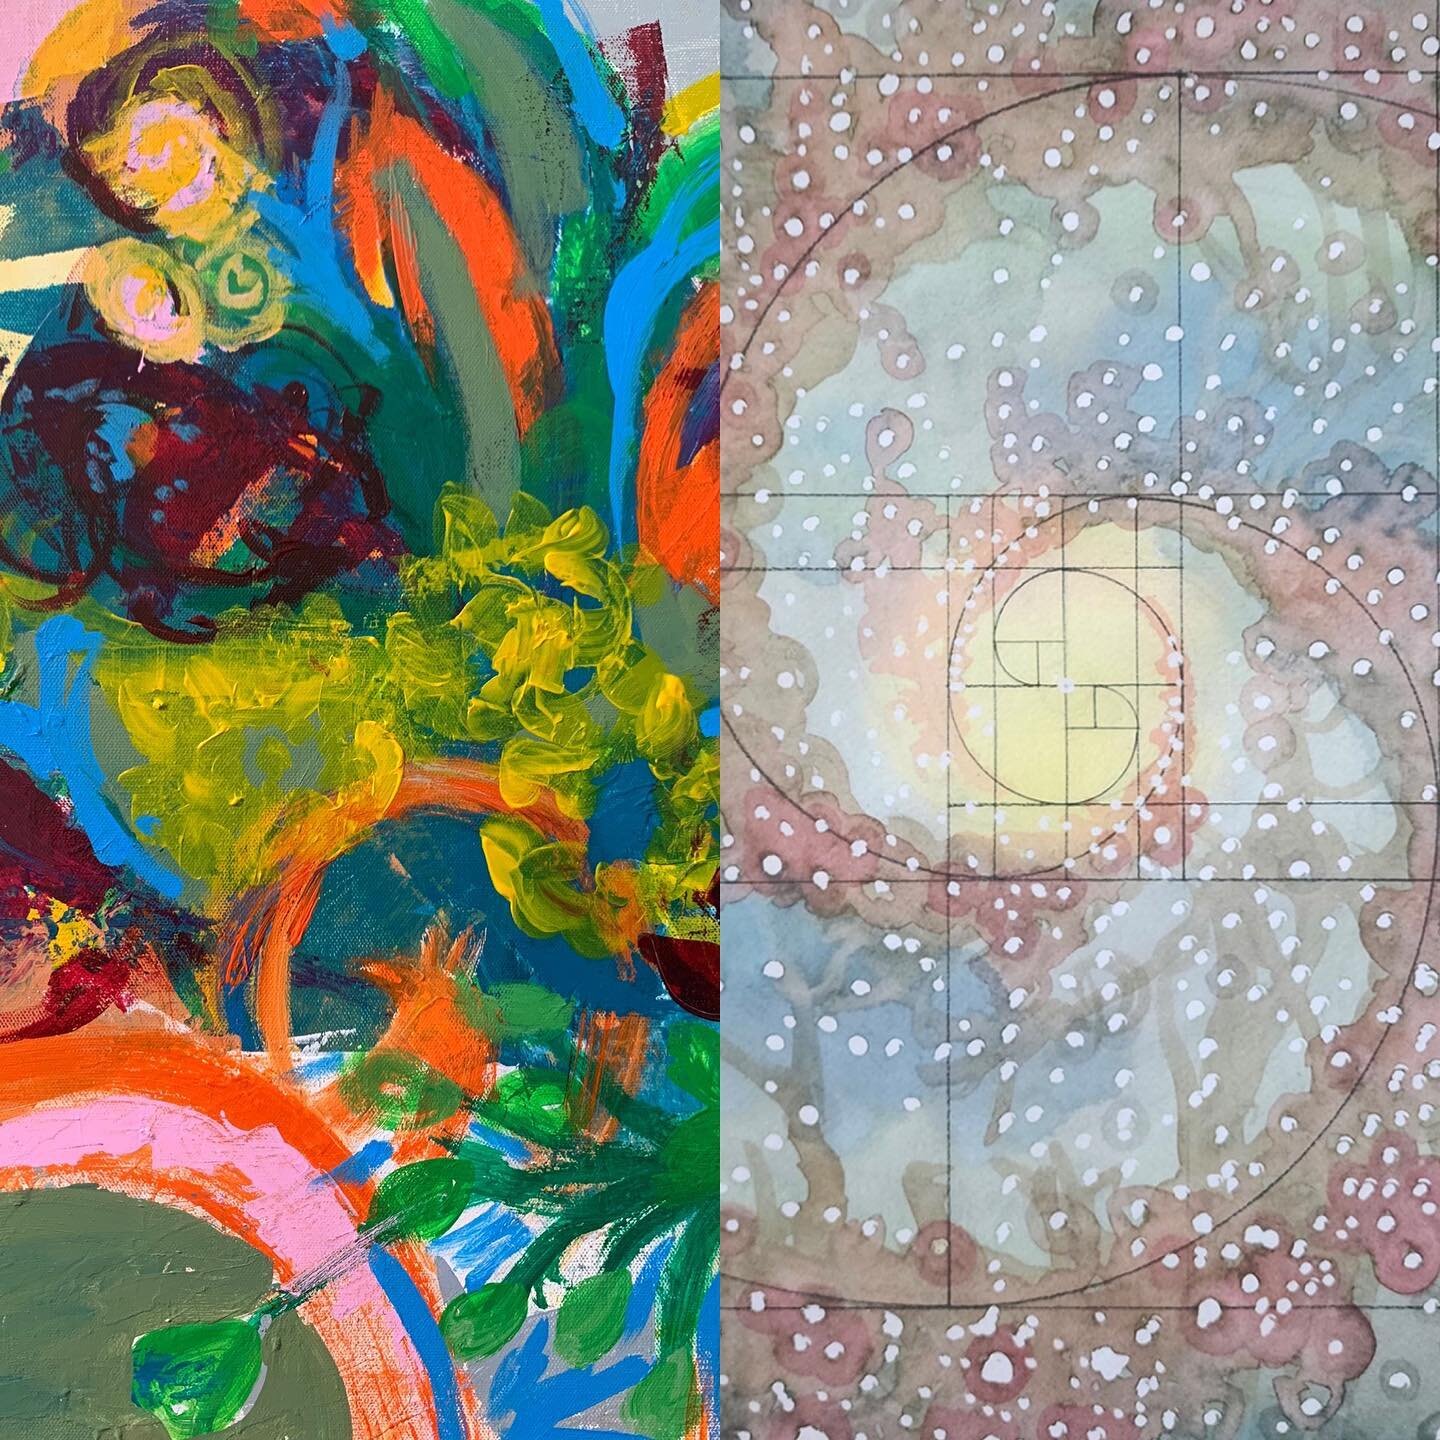 📣Artist Talk This Thursday!📣

Come join us this Thursday, April 13th, from 6pm-8pm and hear artists Elizabeth Ventura and Jorge Arias share about their creatives process and their current exhibition &ldquo;Expressions of Abstraction and Sacred Geom